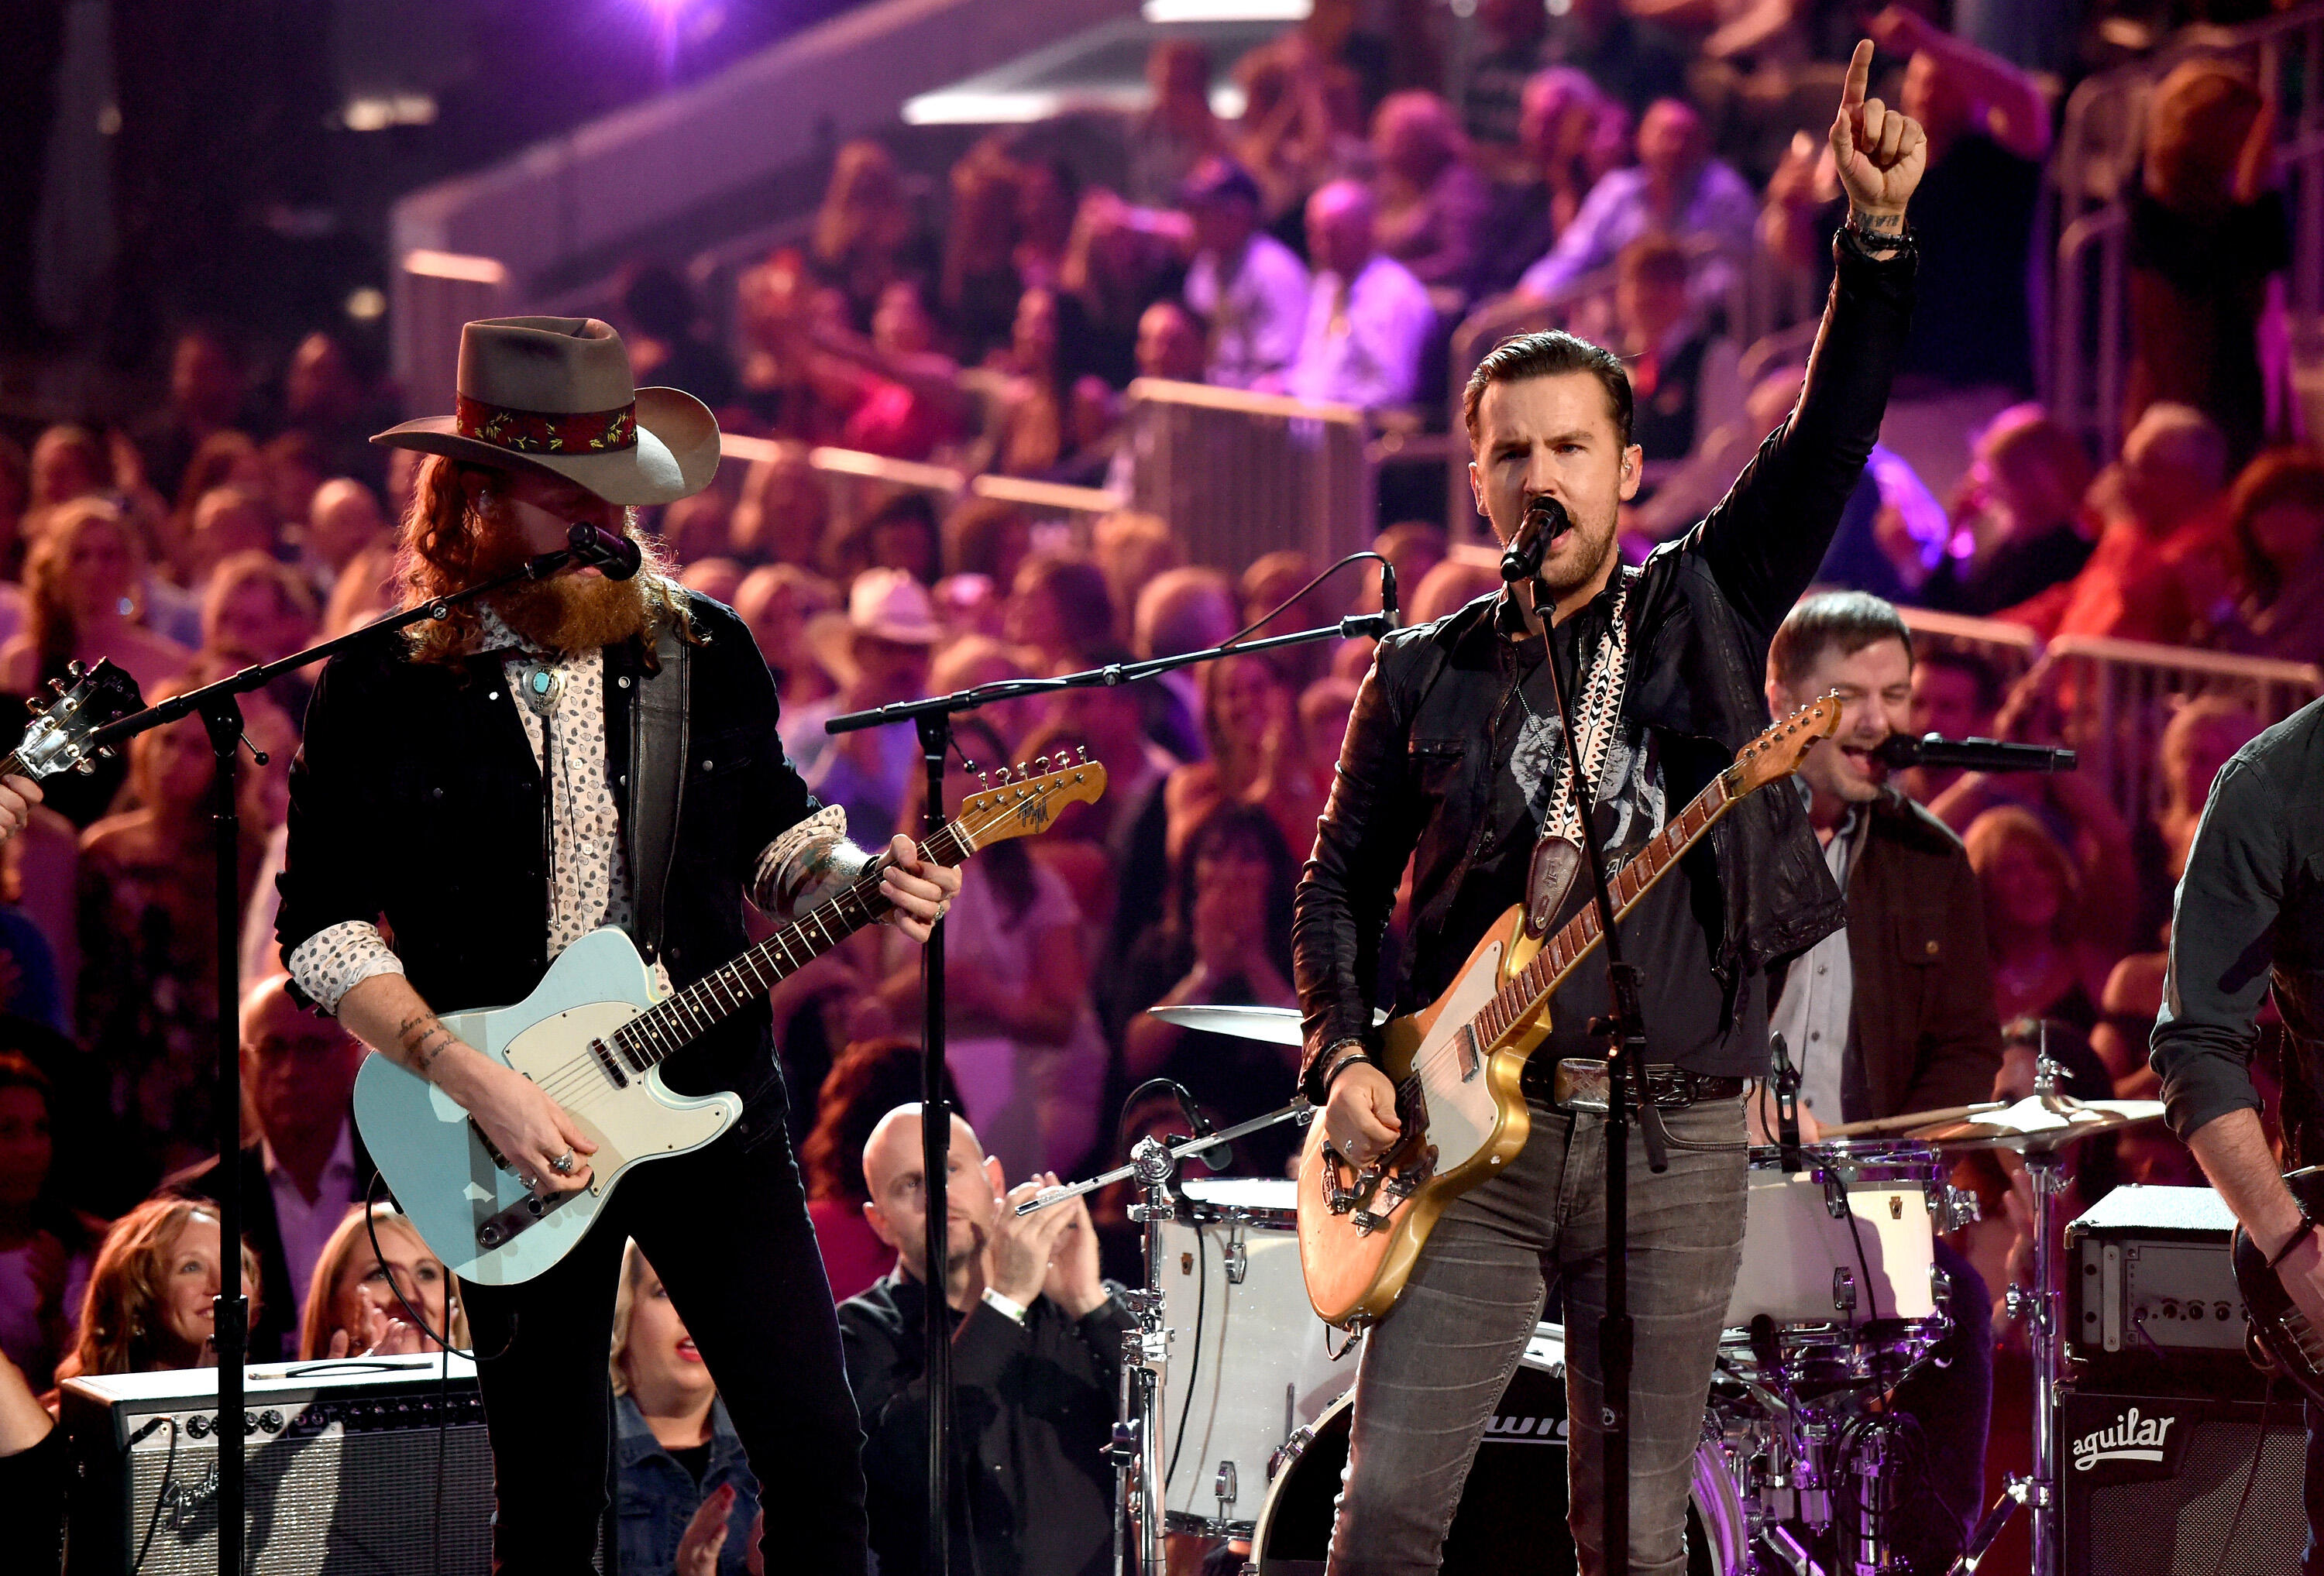 LAS VEGAS, NV - APRIL 02:  Musicians John Osborne (L) and T.J. Osborne of the music group Brothers Osborne perform onstage during the 52nd Academy Of Country Music Awards at T-Mobile Arena on April 2, 2017 in Las Vegas, Nevada.  (Photo by Ethan Miller/Get